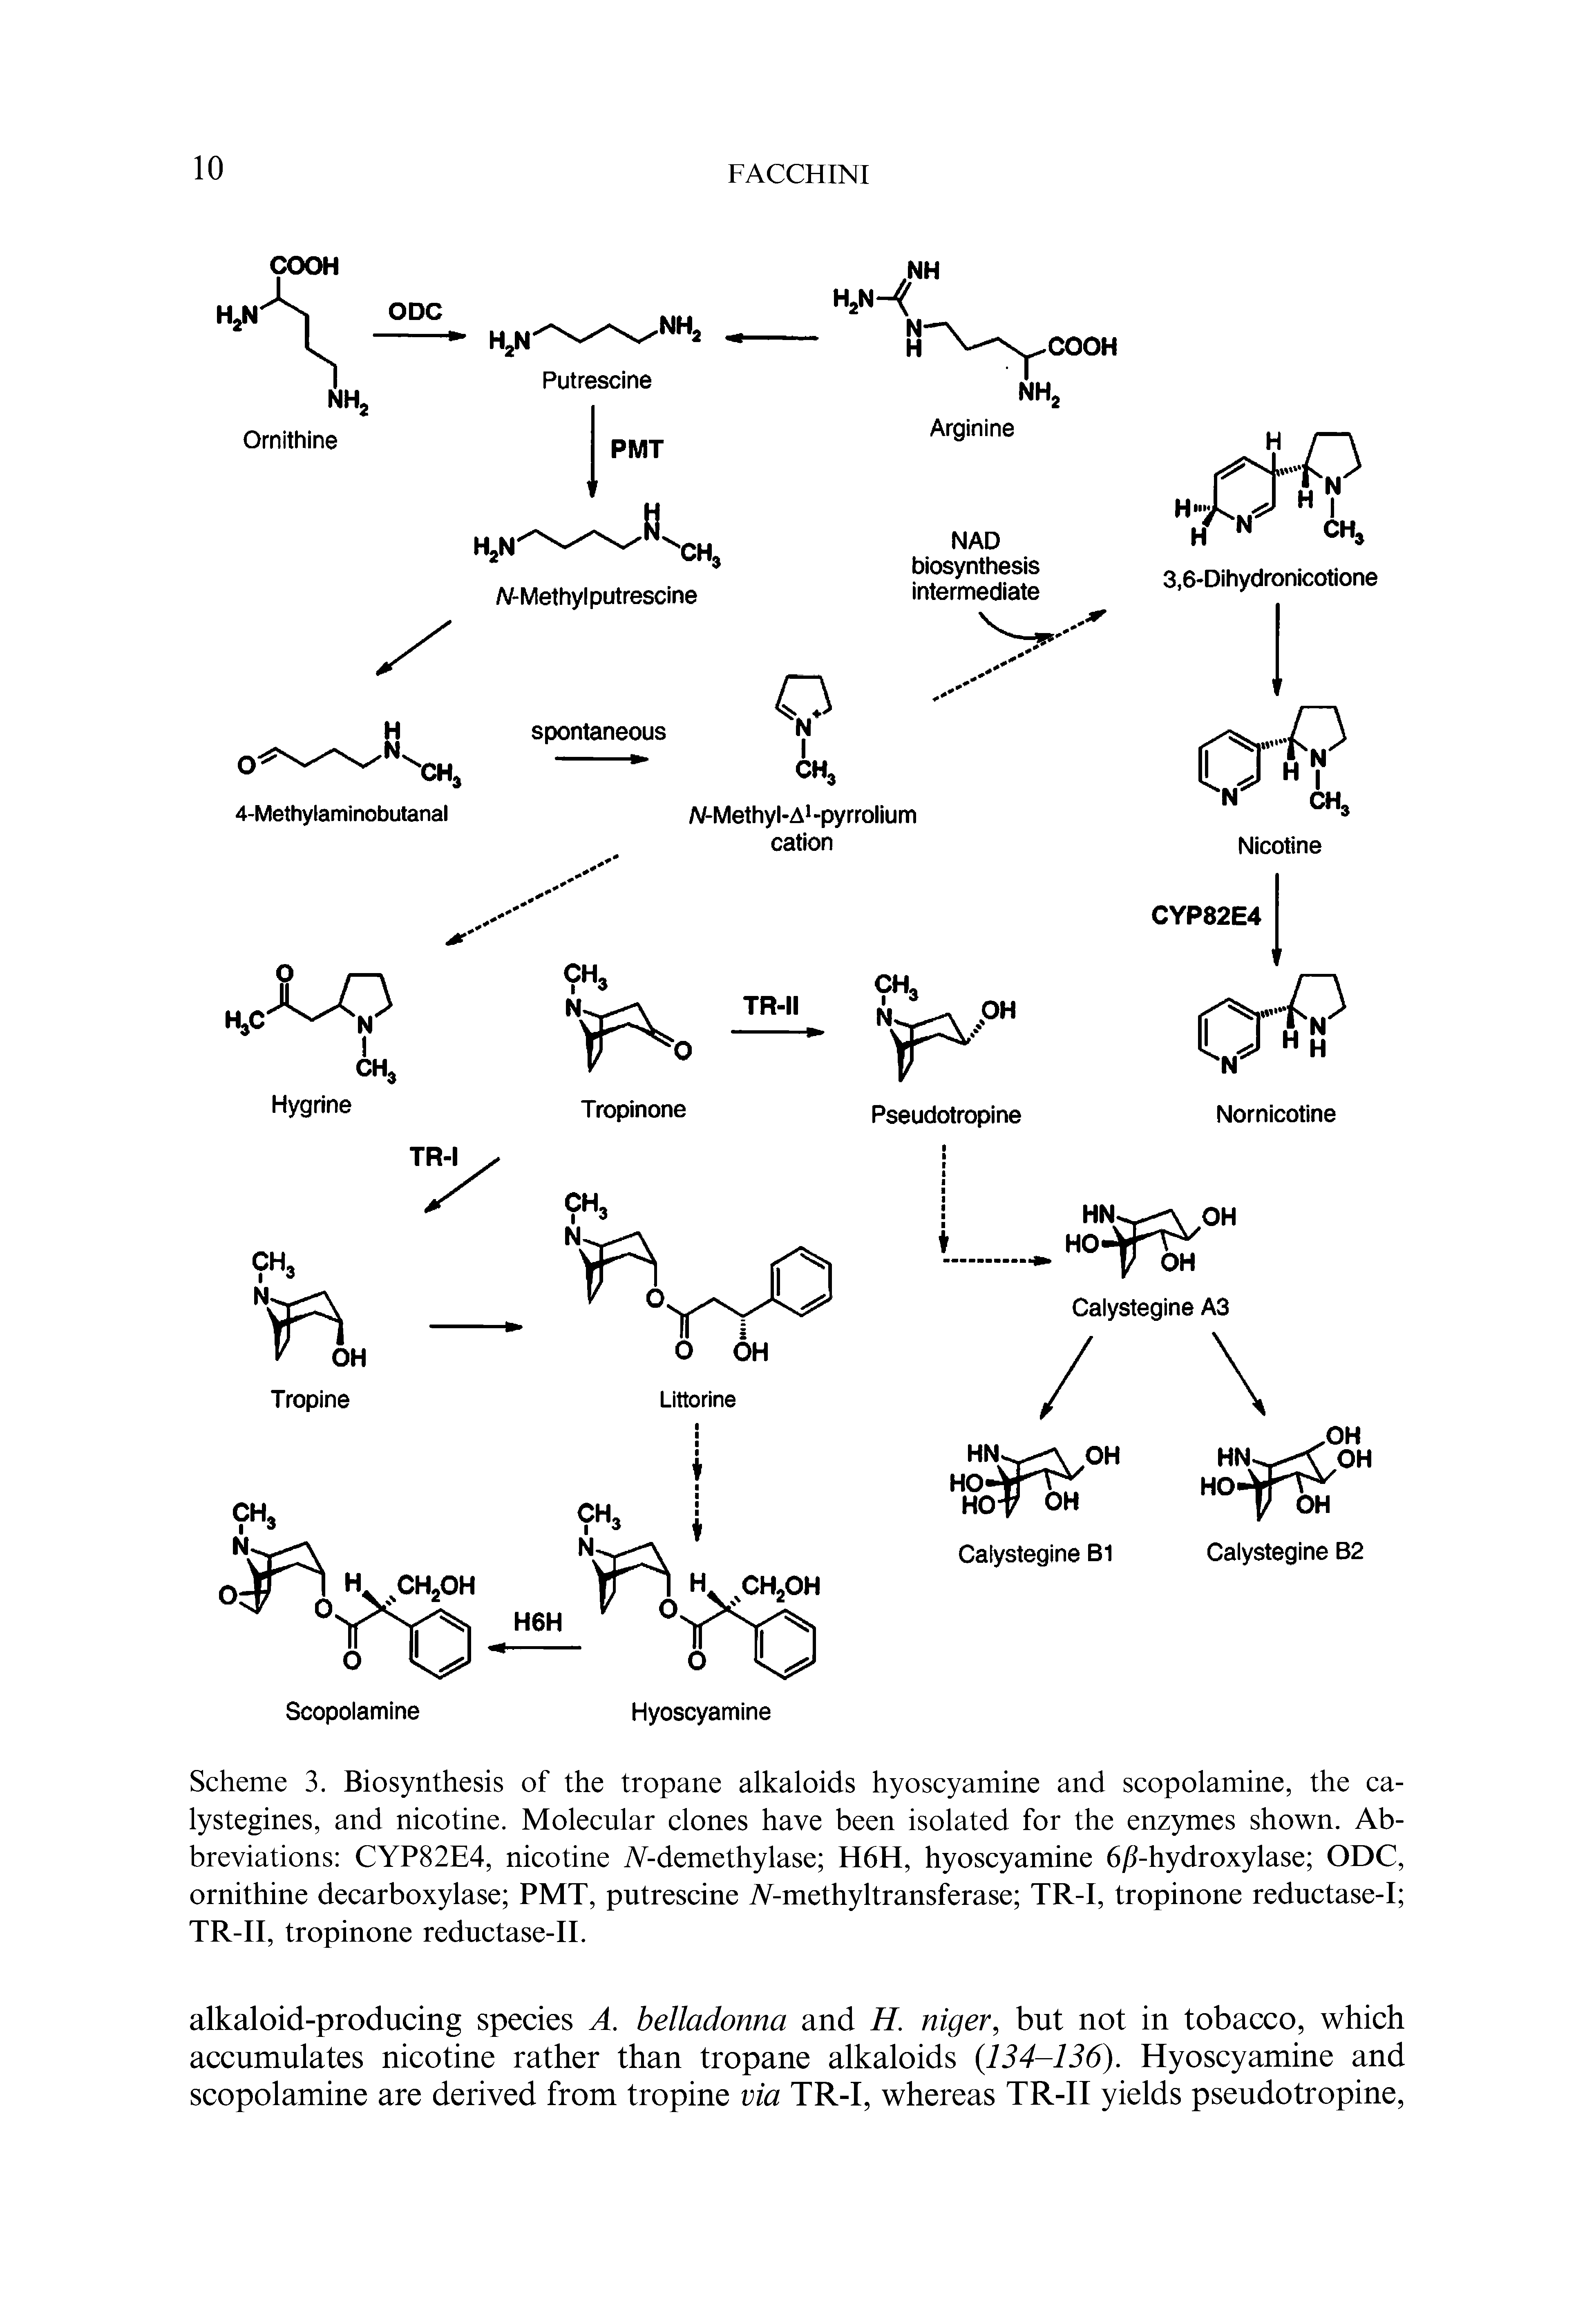 Scheme 3. Biosynthesis of the tropane alkaloids hyoscyamine and scopolamine, the ca-lystegines, and nicotine. Molecular clones have been isolated for the enzymes shown. Abbreviations CYP82E4, nicotine A-demethylase H6H, hyoscyamine 6jS-hydroxylase ODC, ornithine decarboxylase PMT, putrescine A-methyltransferase TR-I, tropinone reductase-I TR-II, tropinone reductase-II.